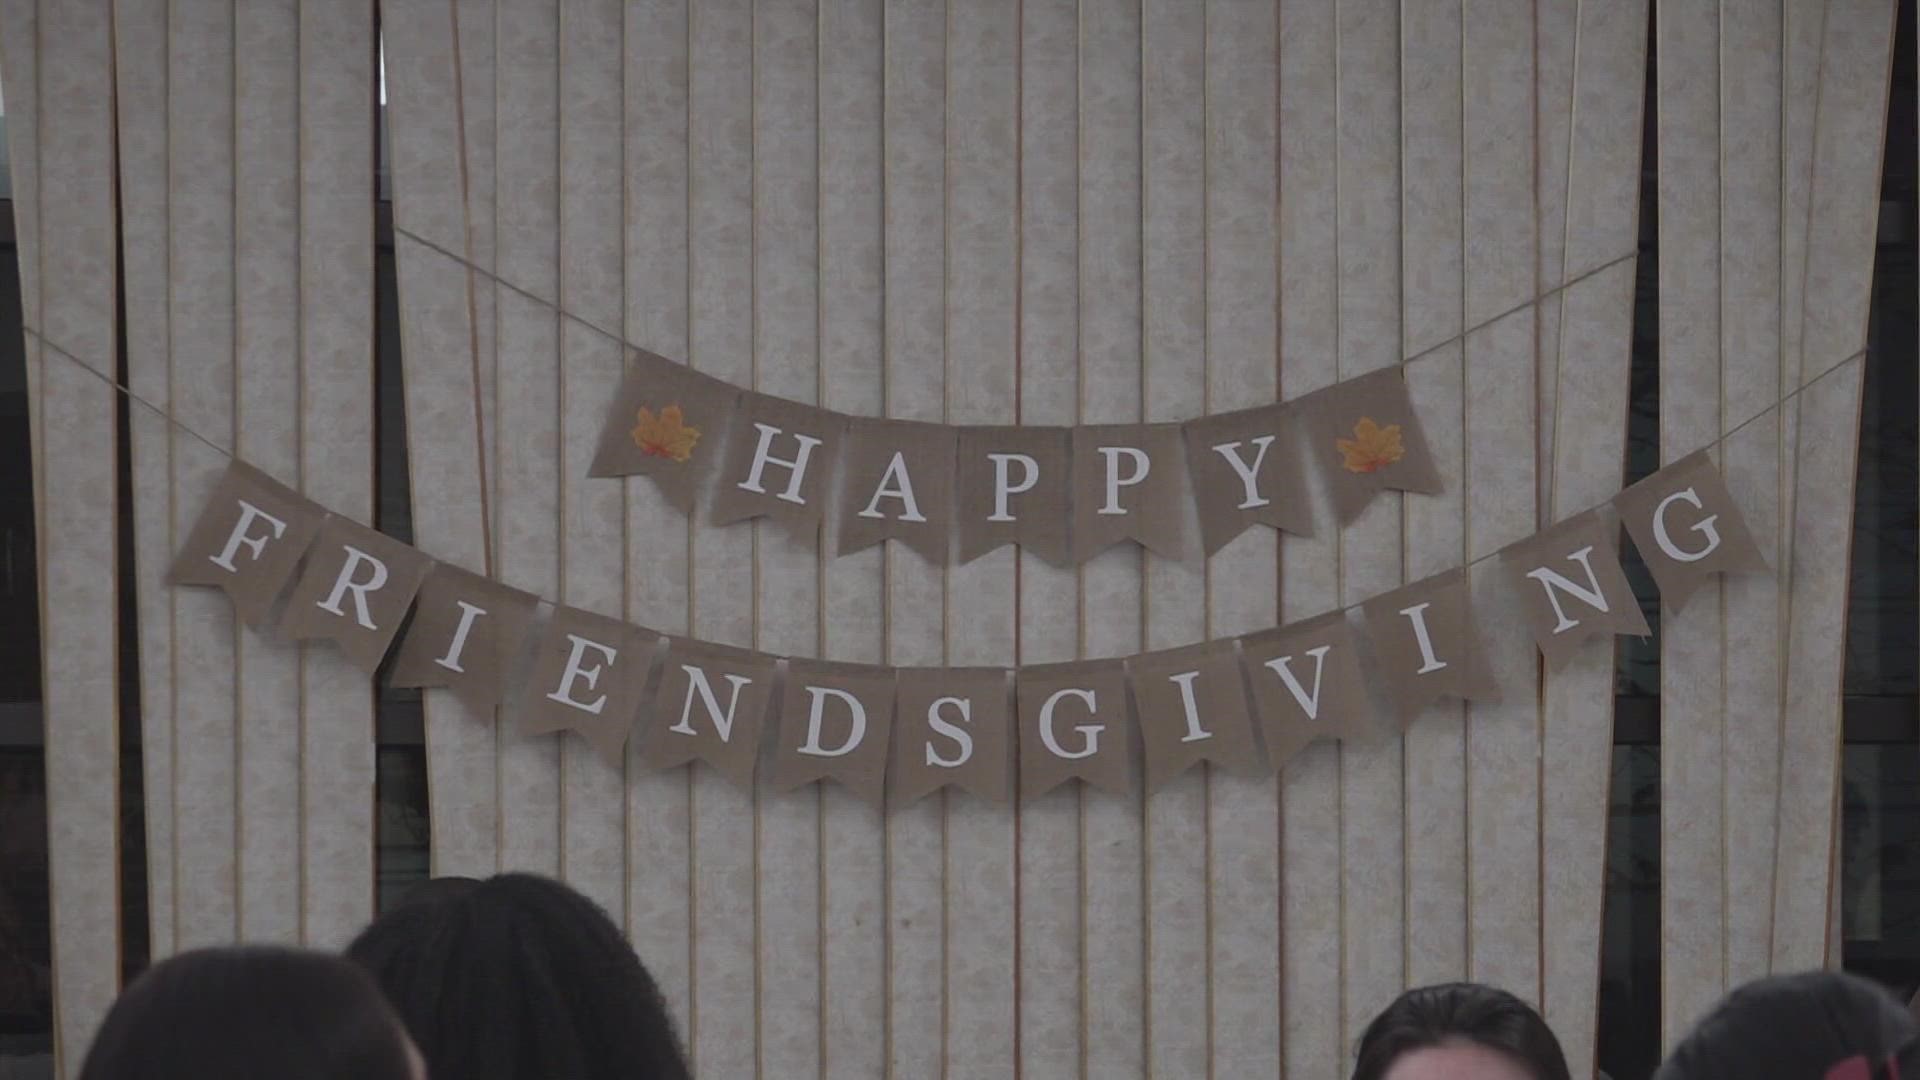 The annual Friendsgiving Community Dinner brings together friends and chosen family for a special meal ahead of Thanksgiving.